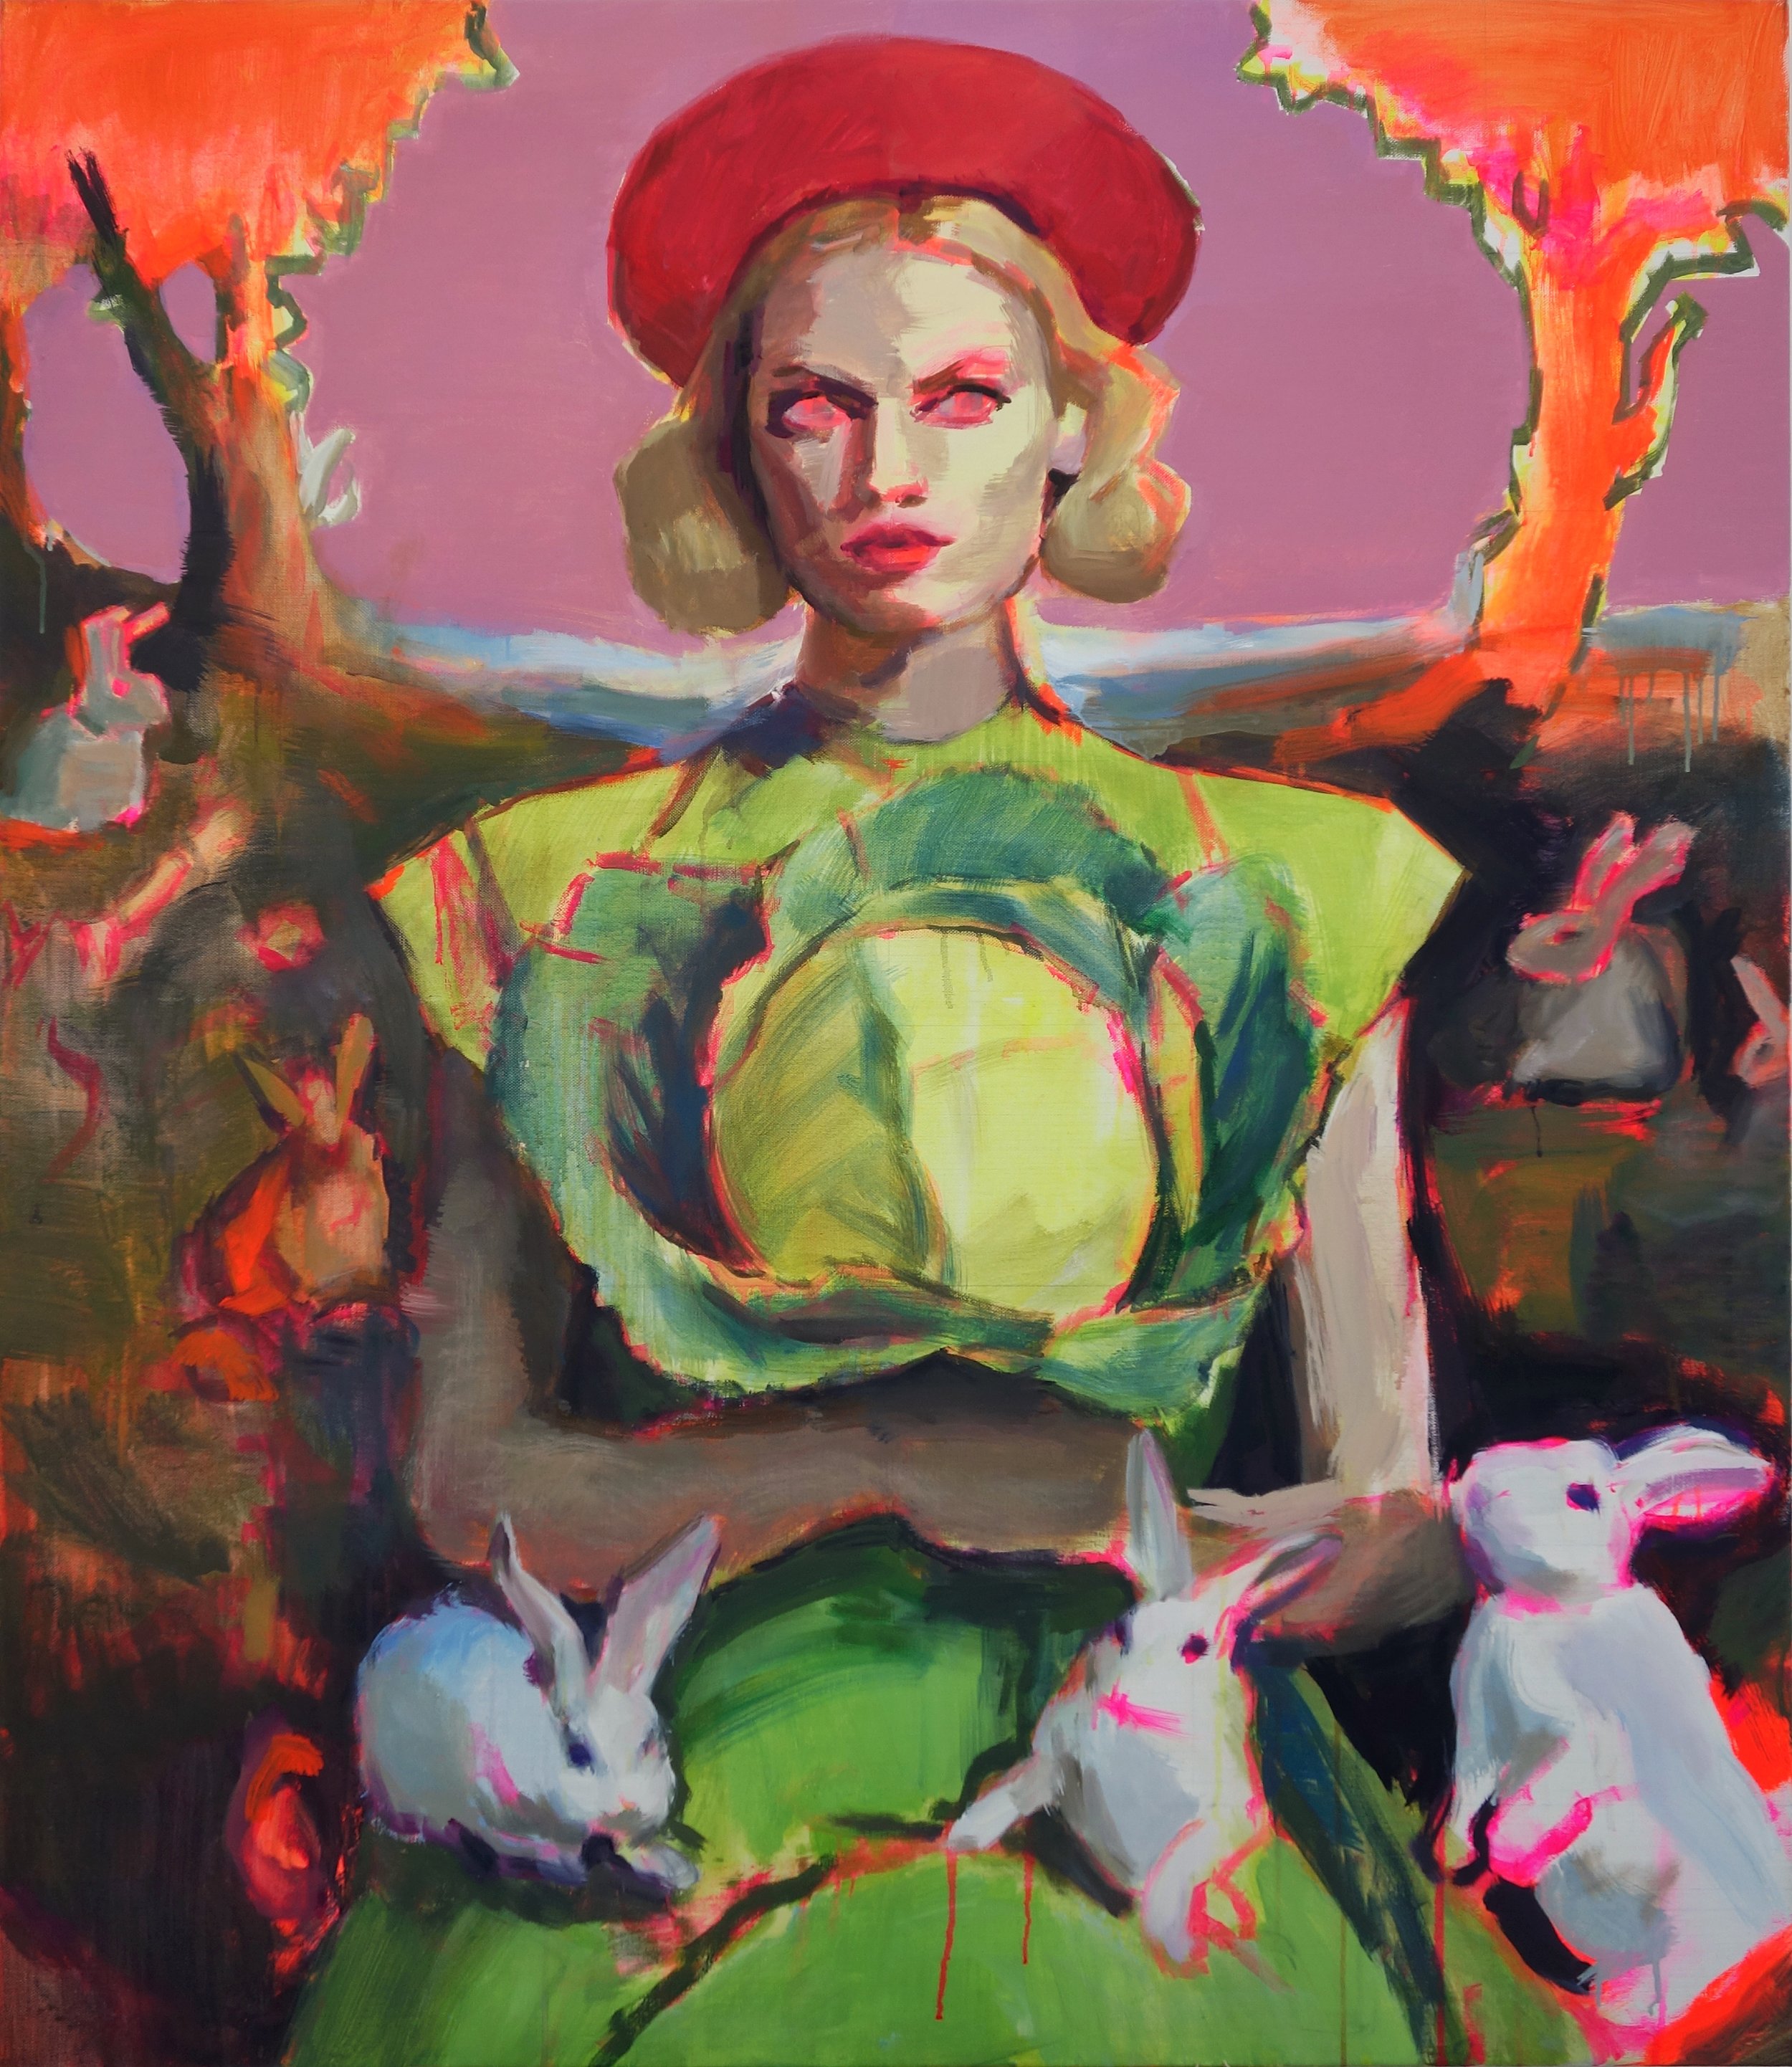 'The gardener's daughter had a lot on her mind' 140x120 cm, Flashe on linen, 2023